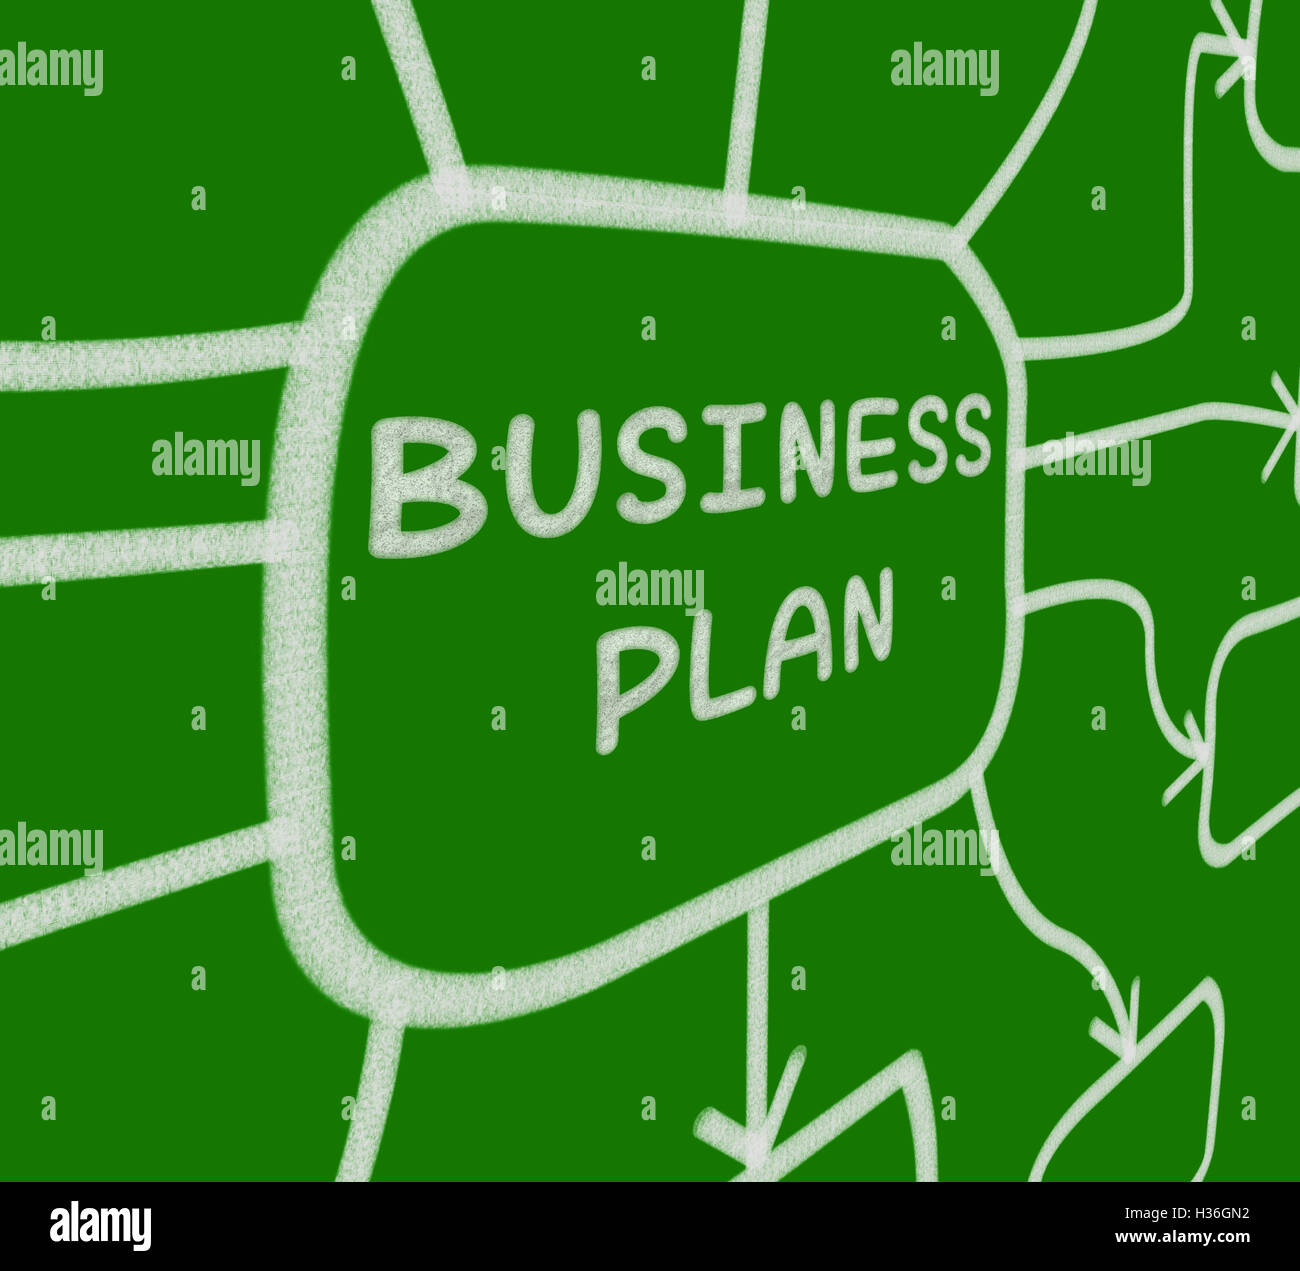 Business Plan Diagram Means Company Organization And Strategy Stock Photo